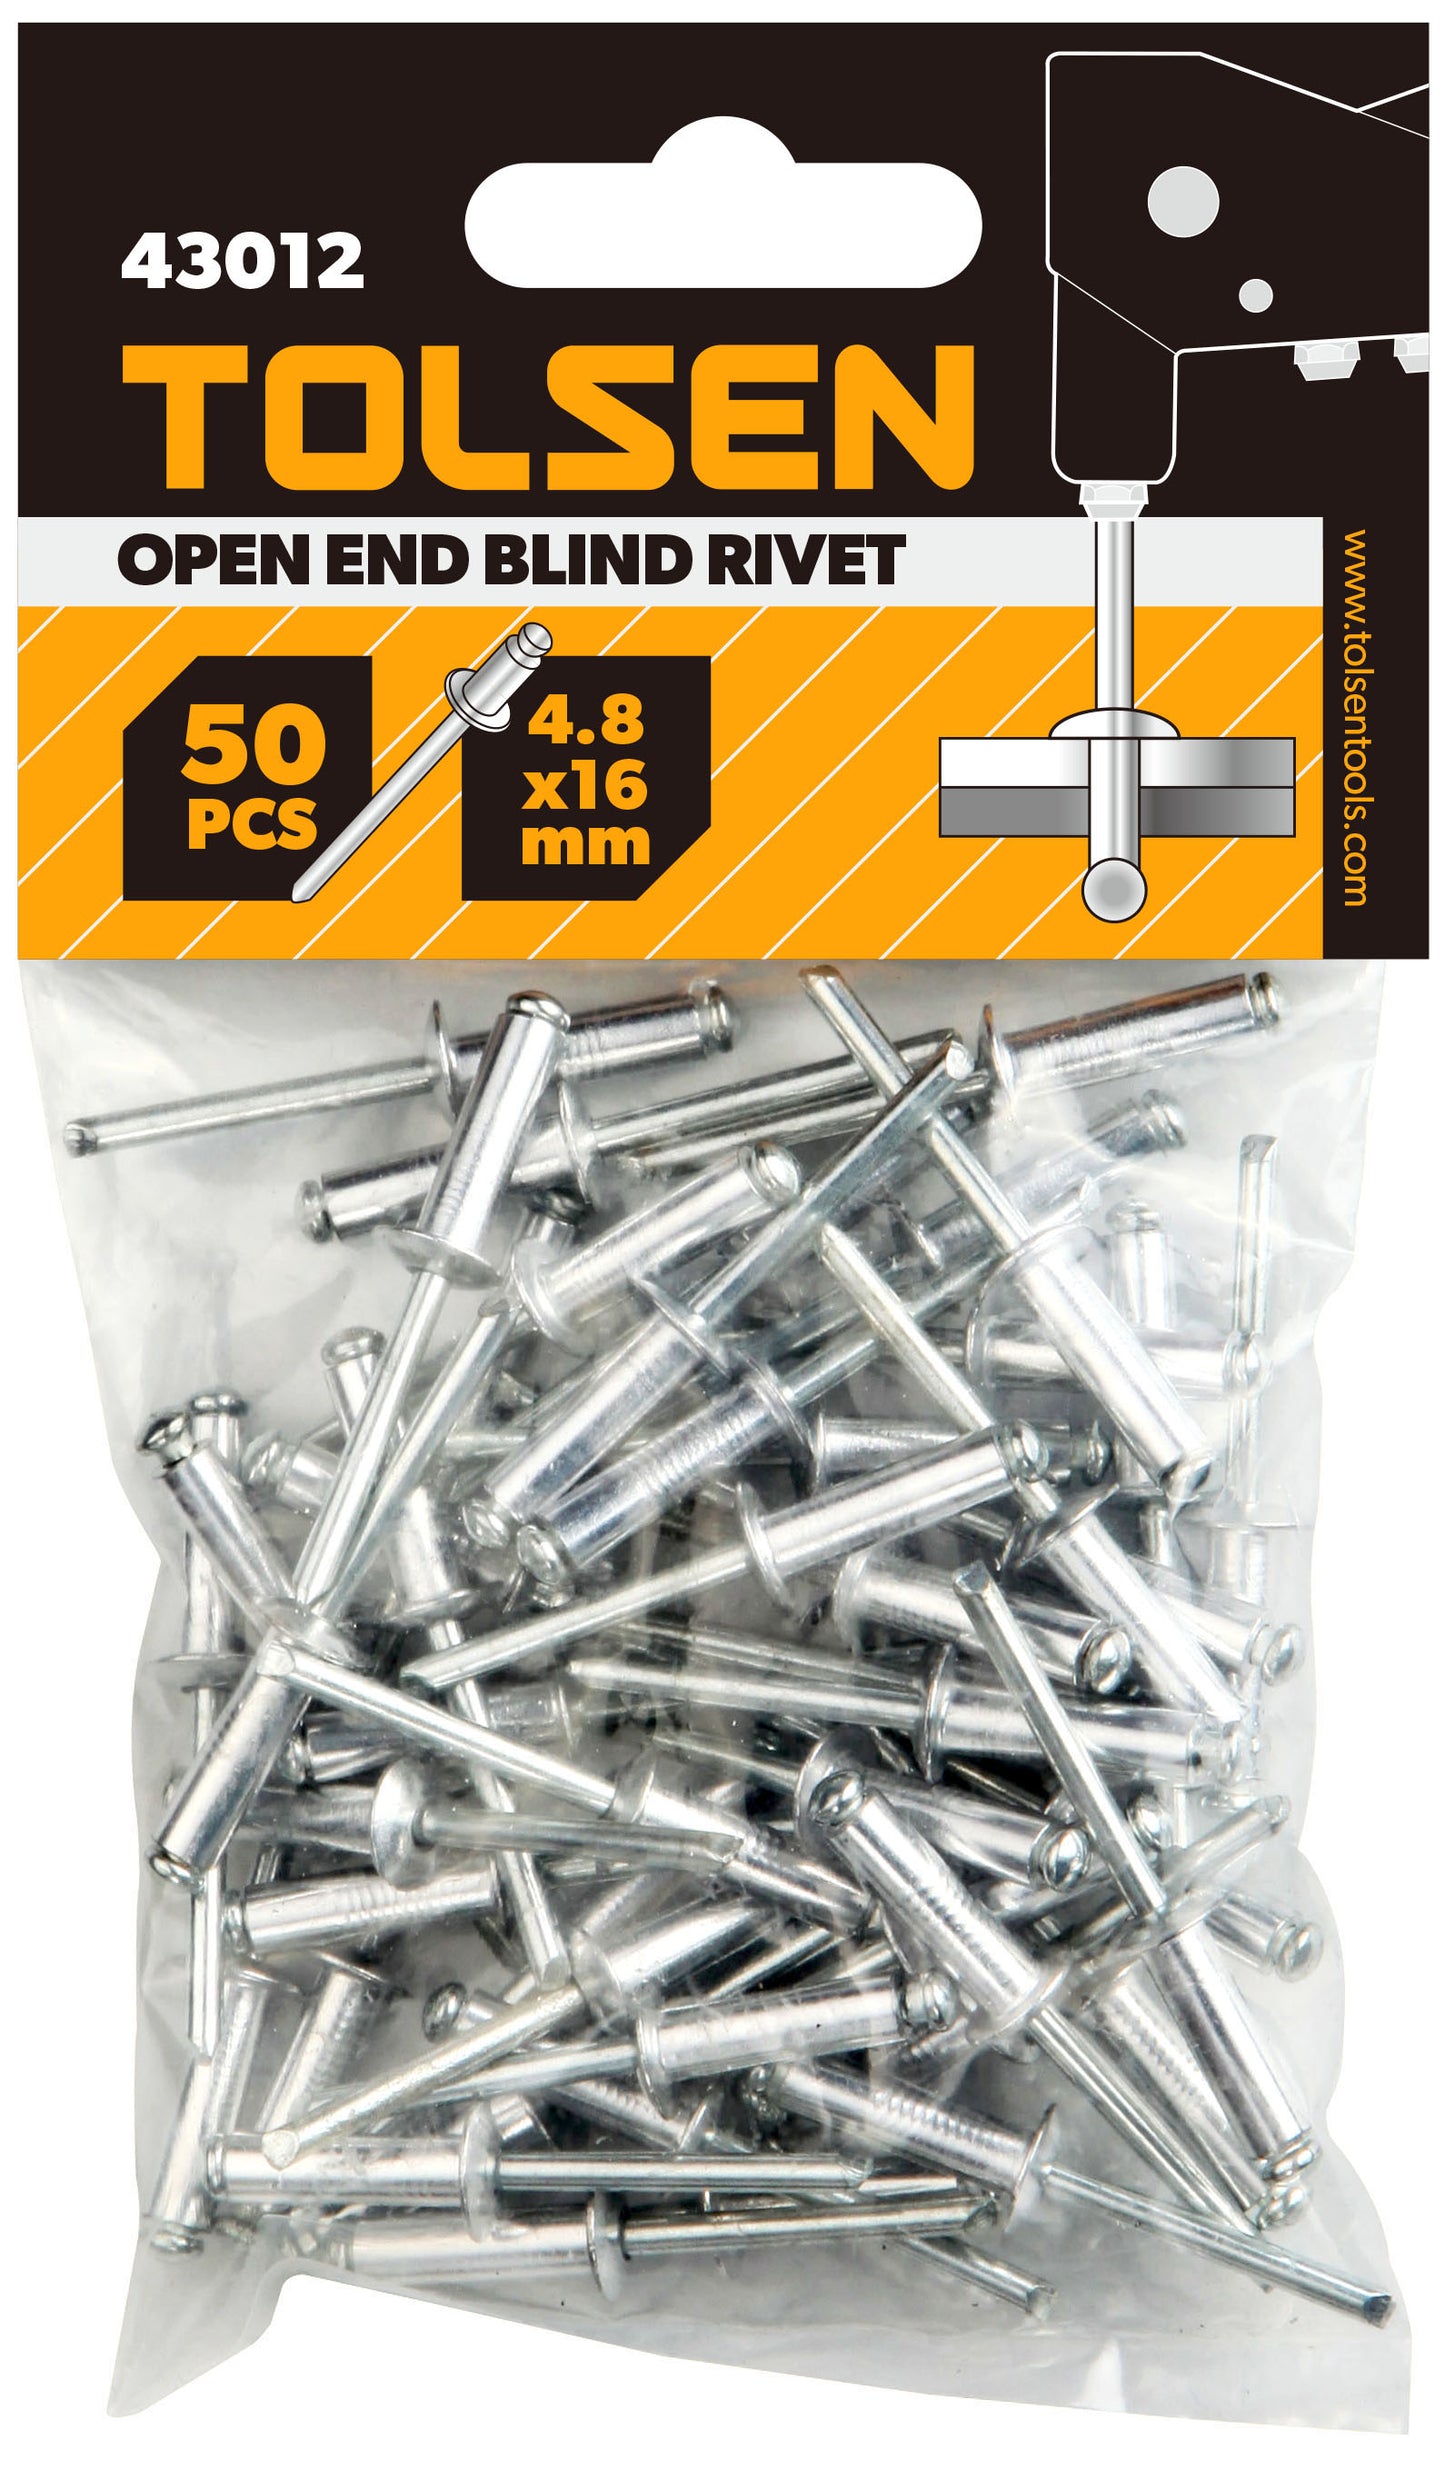 50PCS OPEN END BLIND RIVET (ALL SIZE 2.4mm to 4.8mm)